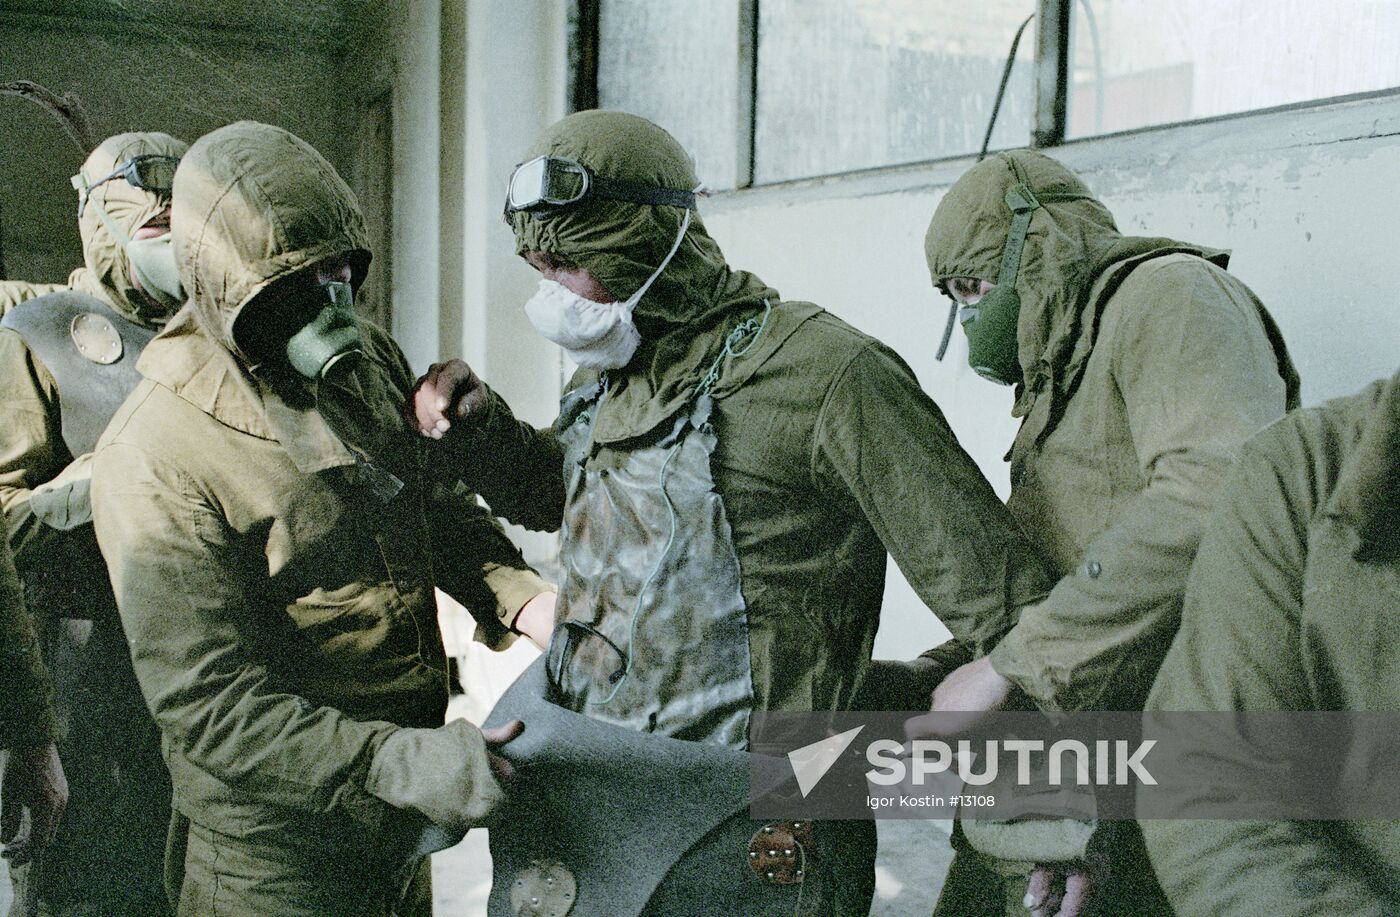 PEOPLE PROTECTIVE SUITS ACCIDENT CHERNOBYL